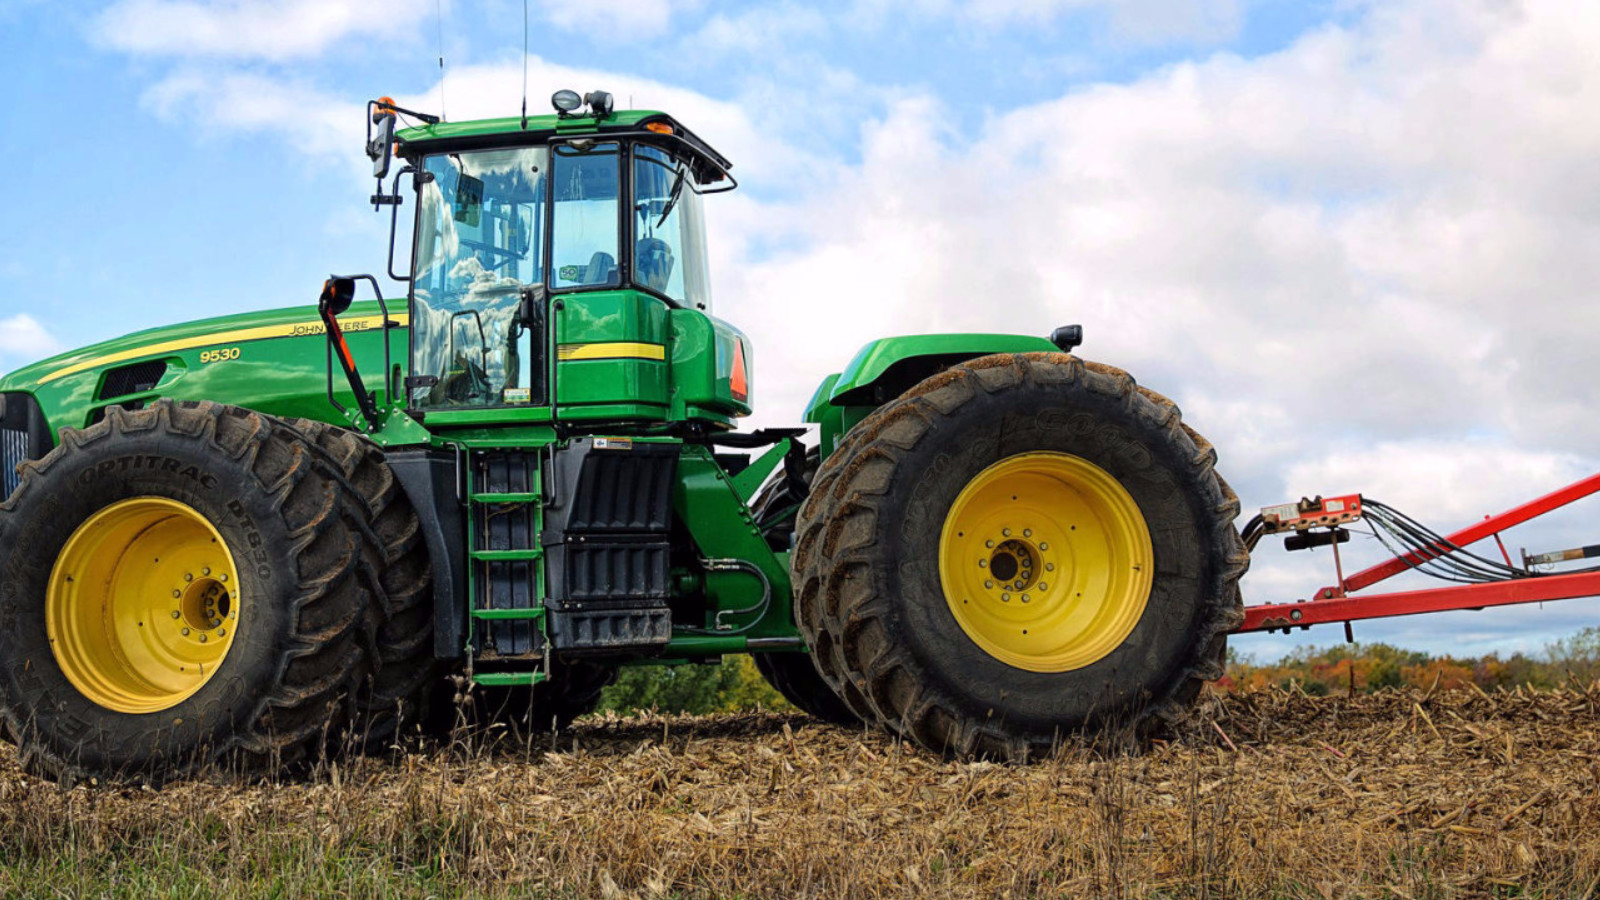 AGRICULTURAL EQUIPMENT PARTS & ACCESSORIES